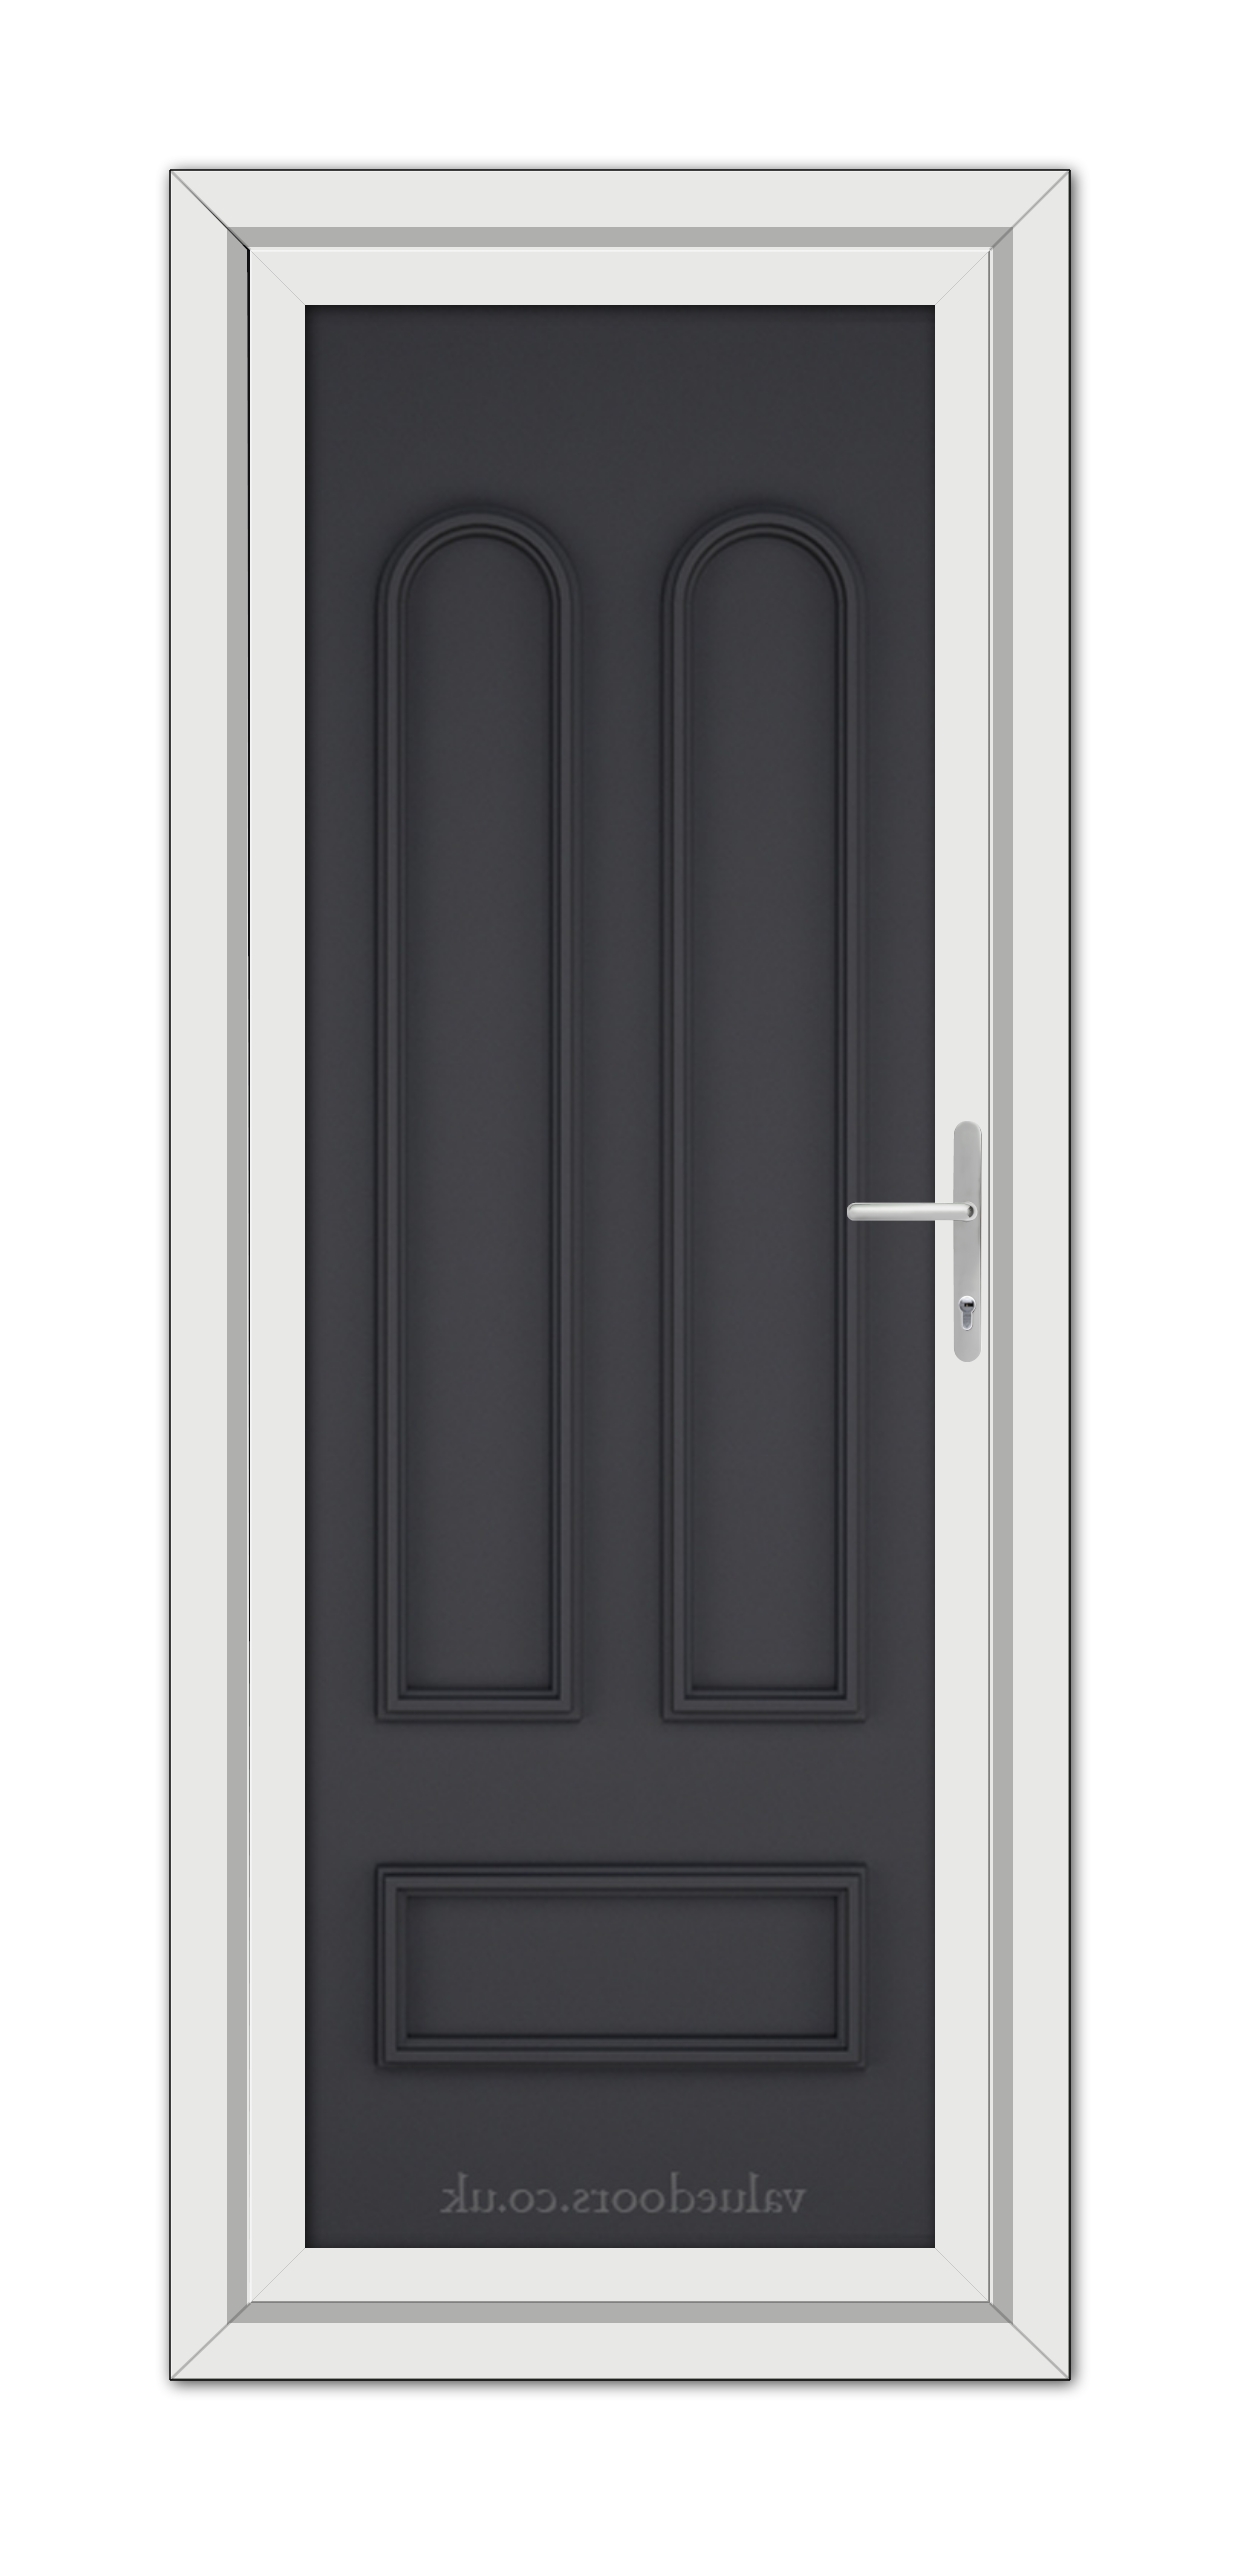 Vertical image of a modern Grey Madrid Solid uPVC Door with two panels and a metallic handle, framed by a white doorframe.